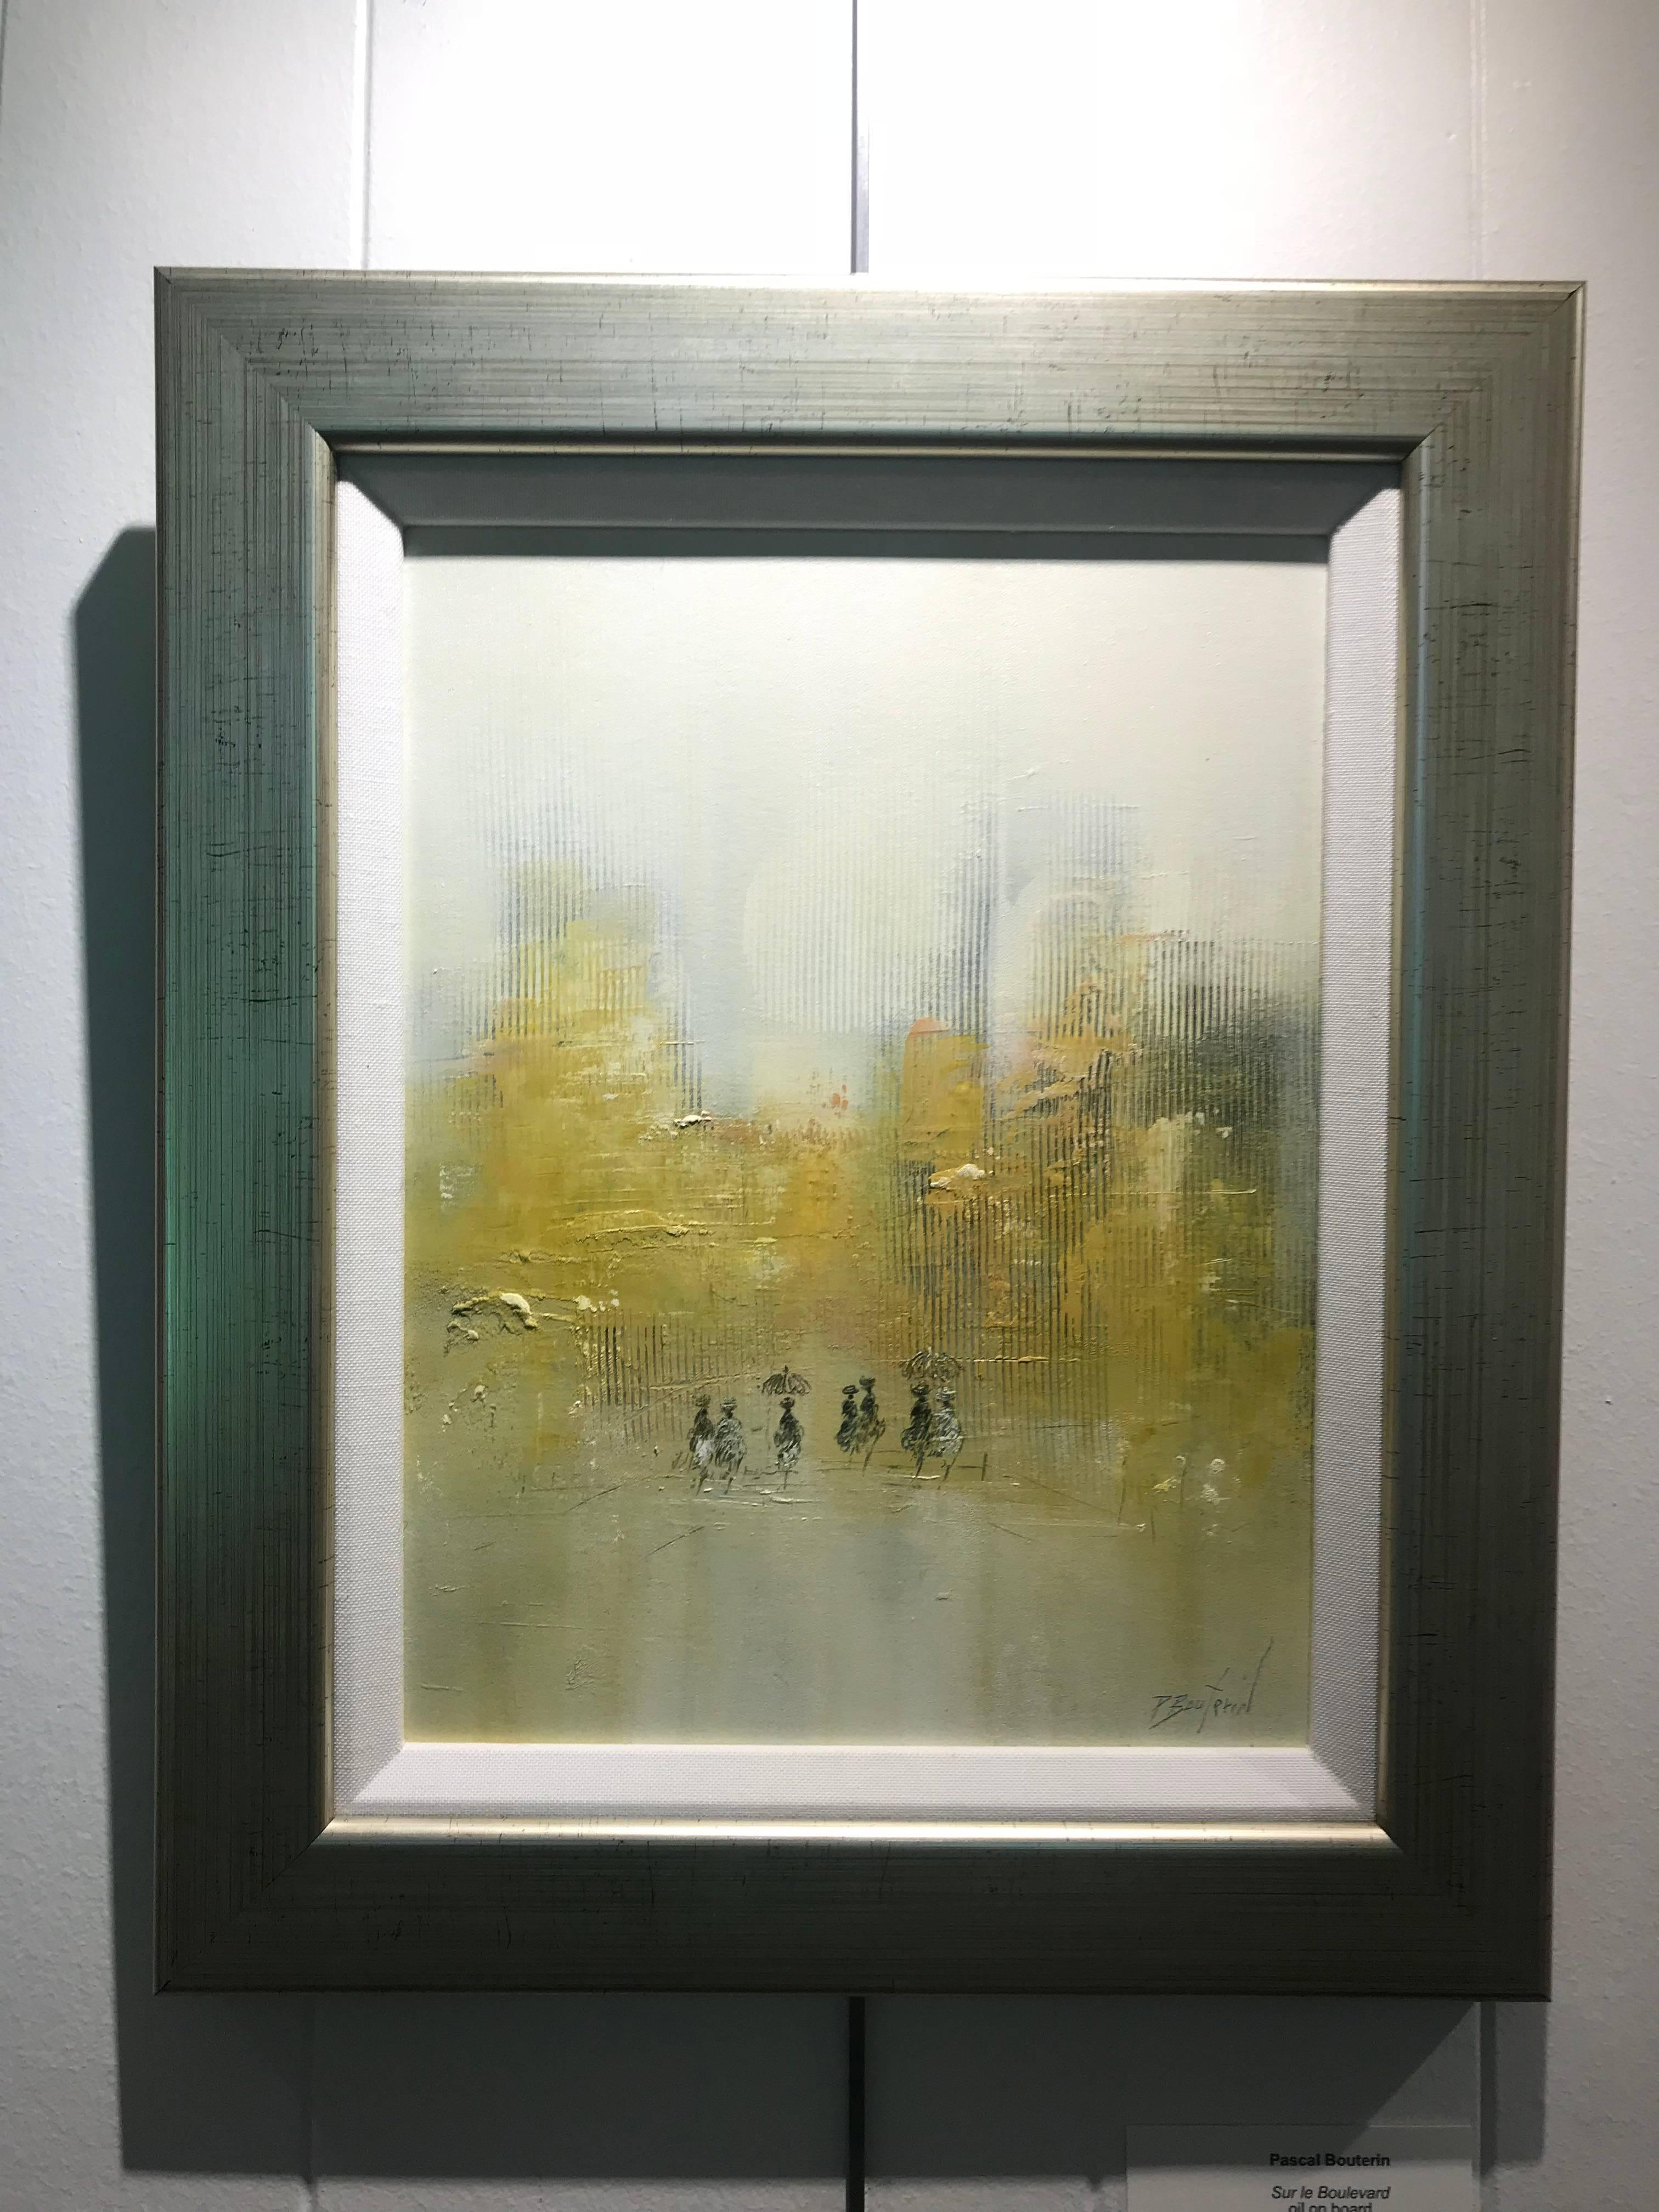 'Sur le Boulevard' is a framed abstract Impressionist oil on board painting created by French artist Pascal Bouterin in 2018. Marked by his style, which is so unmistakably recognizable, this painting features a group of ladies dressed in the manner